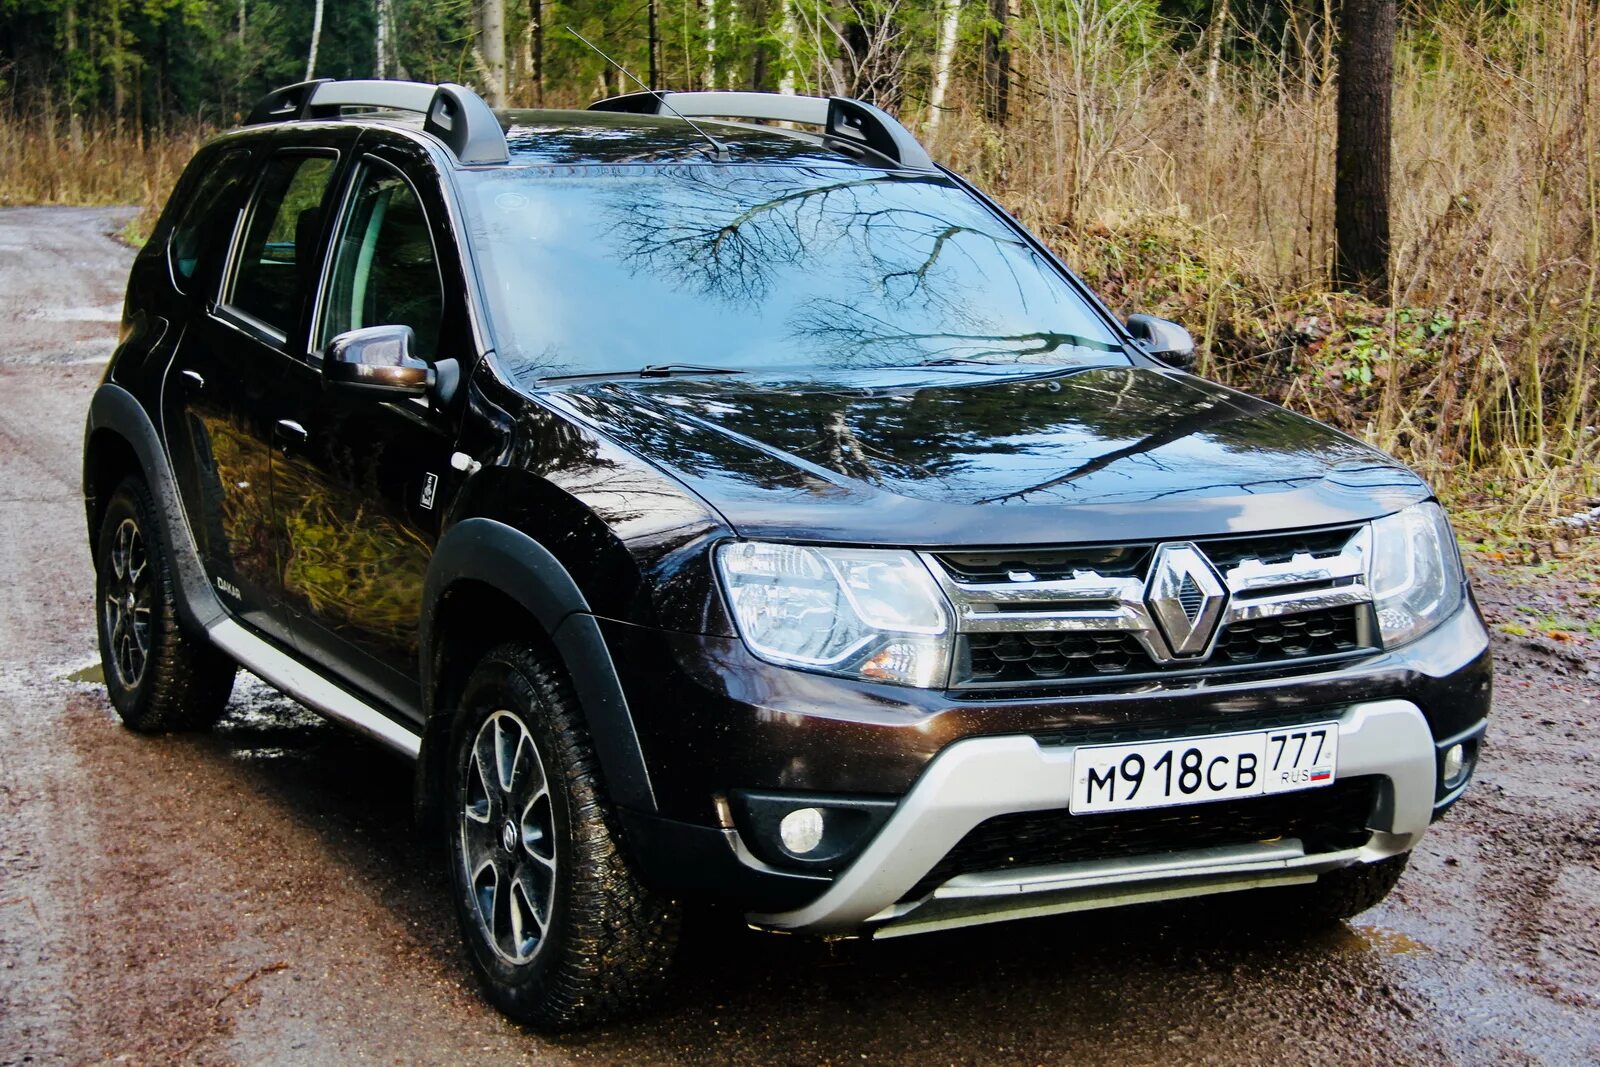 Renault Duster. Renault Duster 2017. Рено Дастер Дакар. Рено Дастер 2016 20. Рено дастер 2.0 4wd